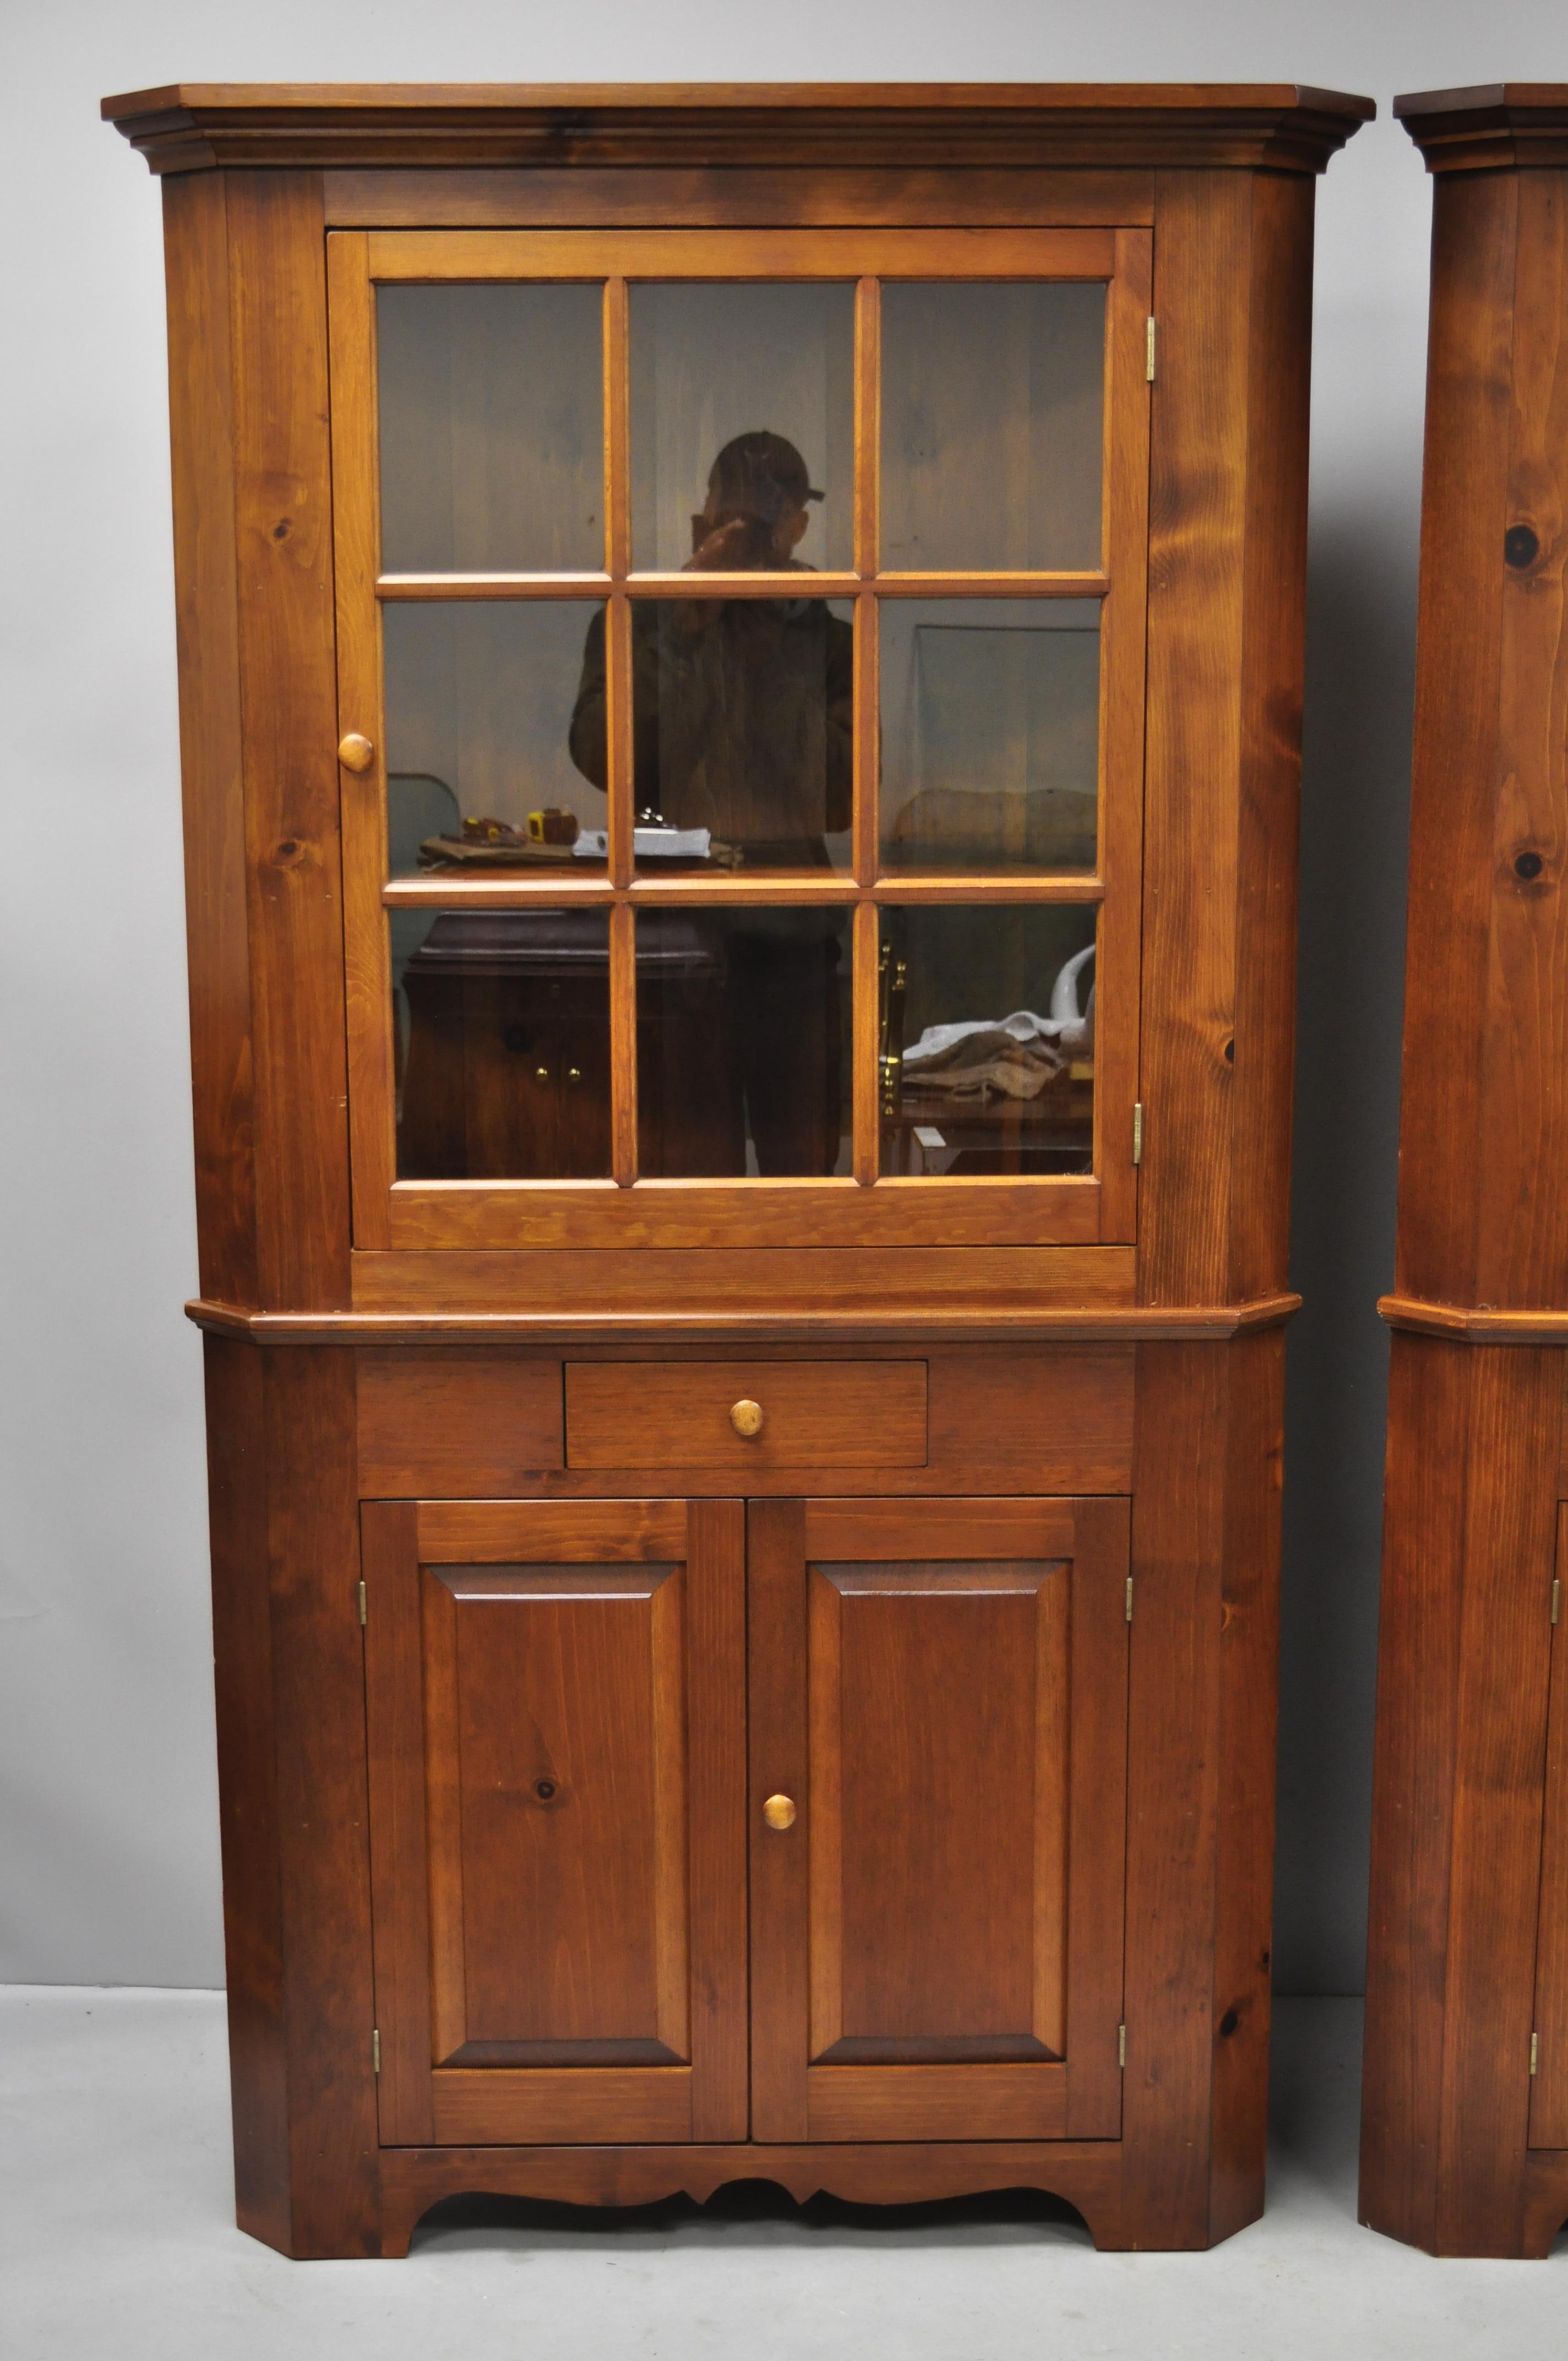 Pair of pine wood Colonial style corner cupboard China cabinets by Tom Seely. Items feature solid wood construction, beautiful wood grain, 2 part construction, glass swing doors, plate groves, 1 dovetailed drawers, quality American craftsmanship,